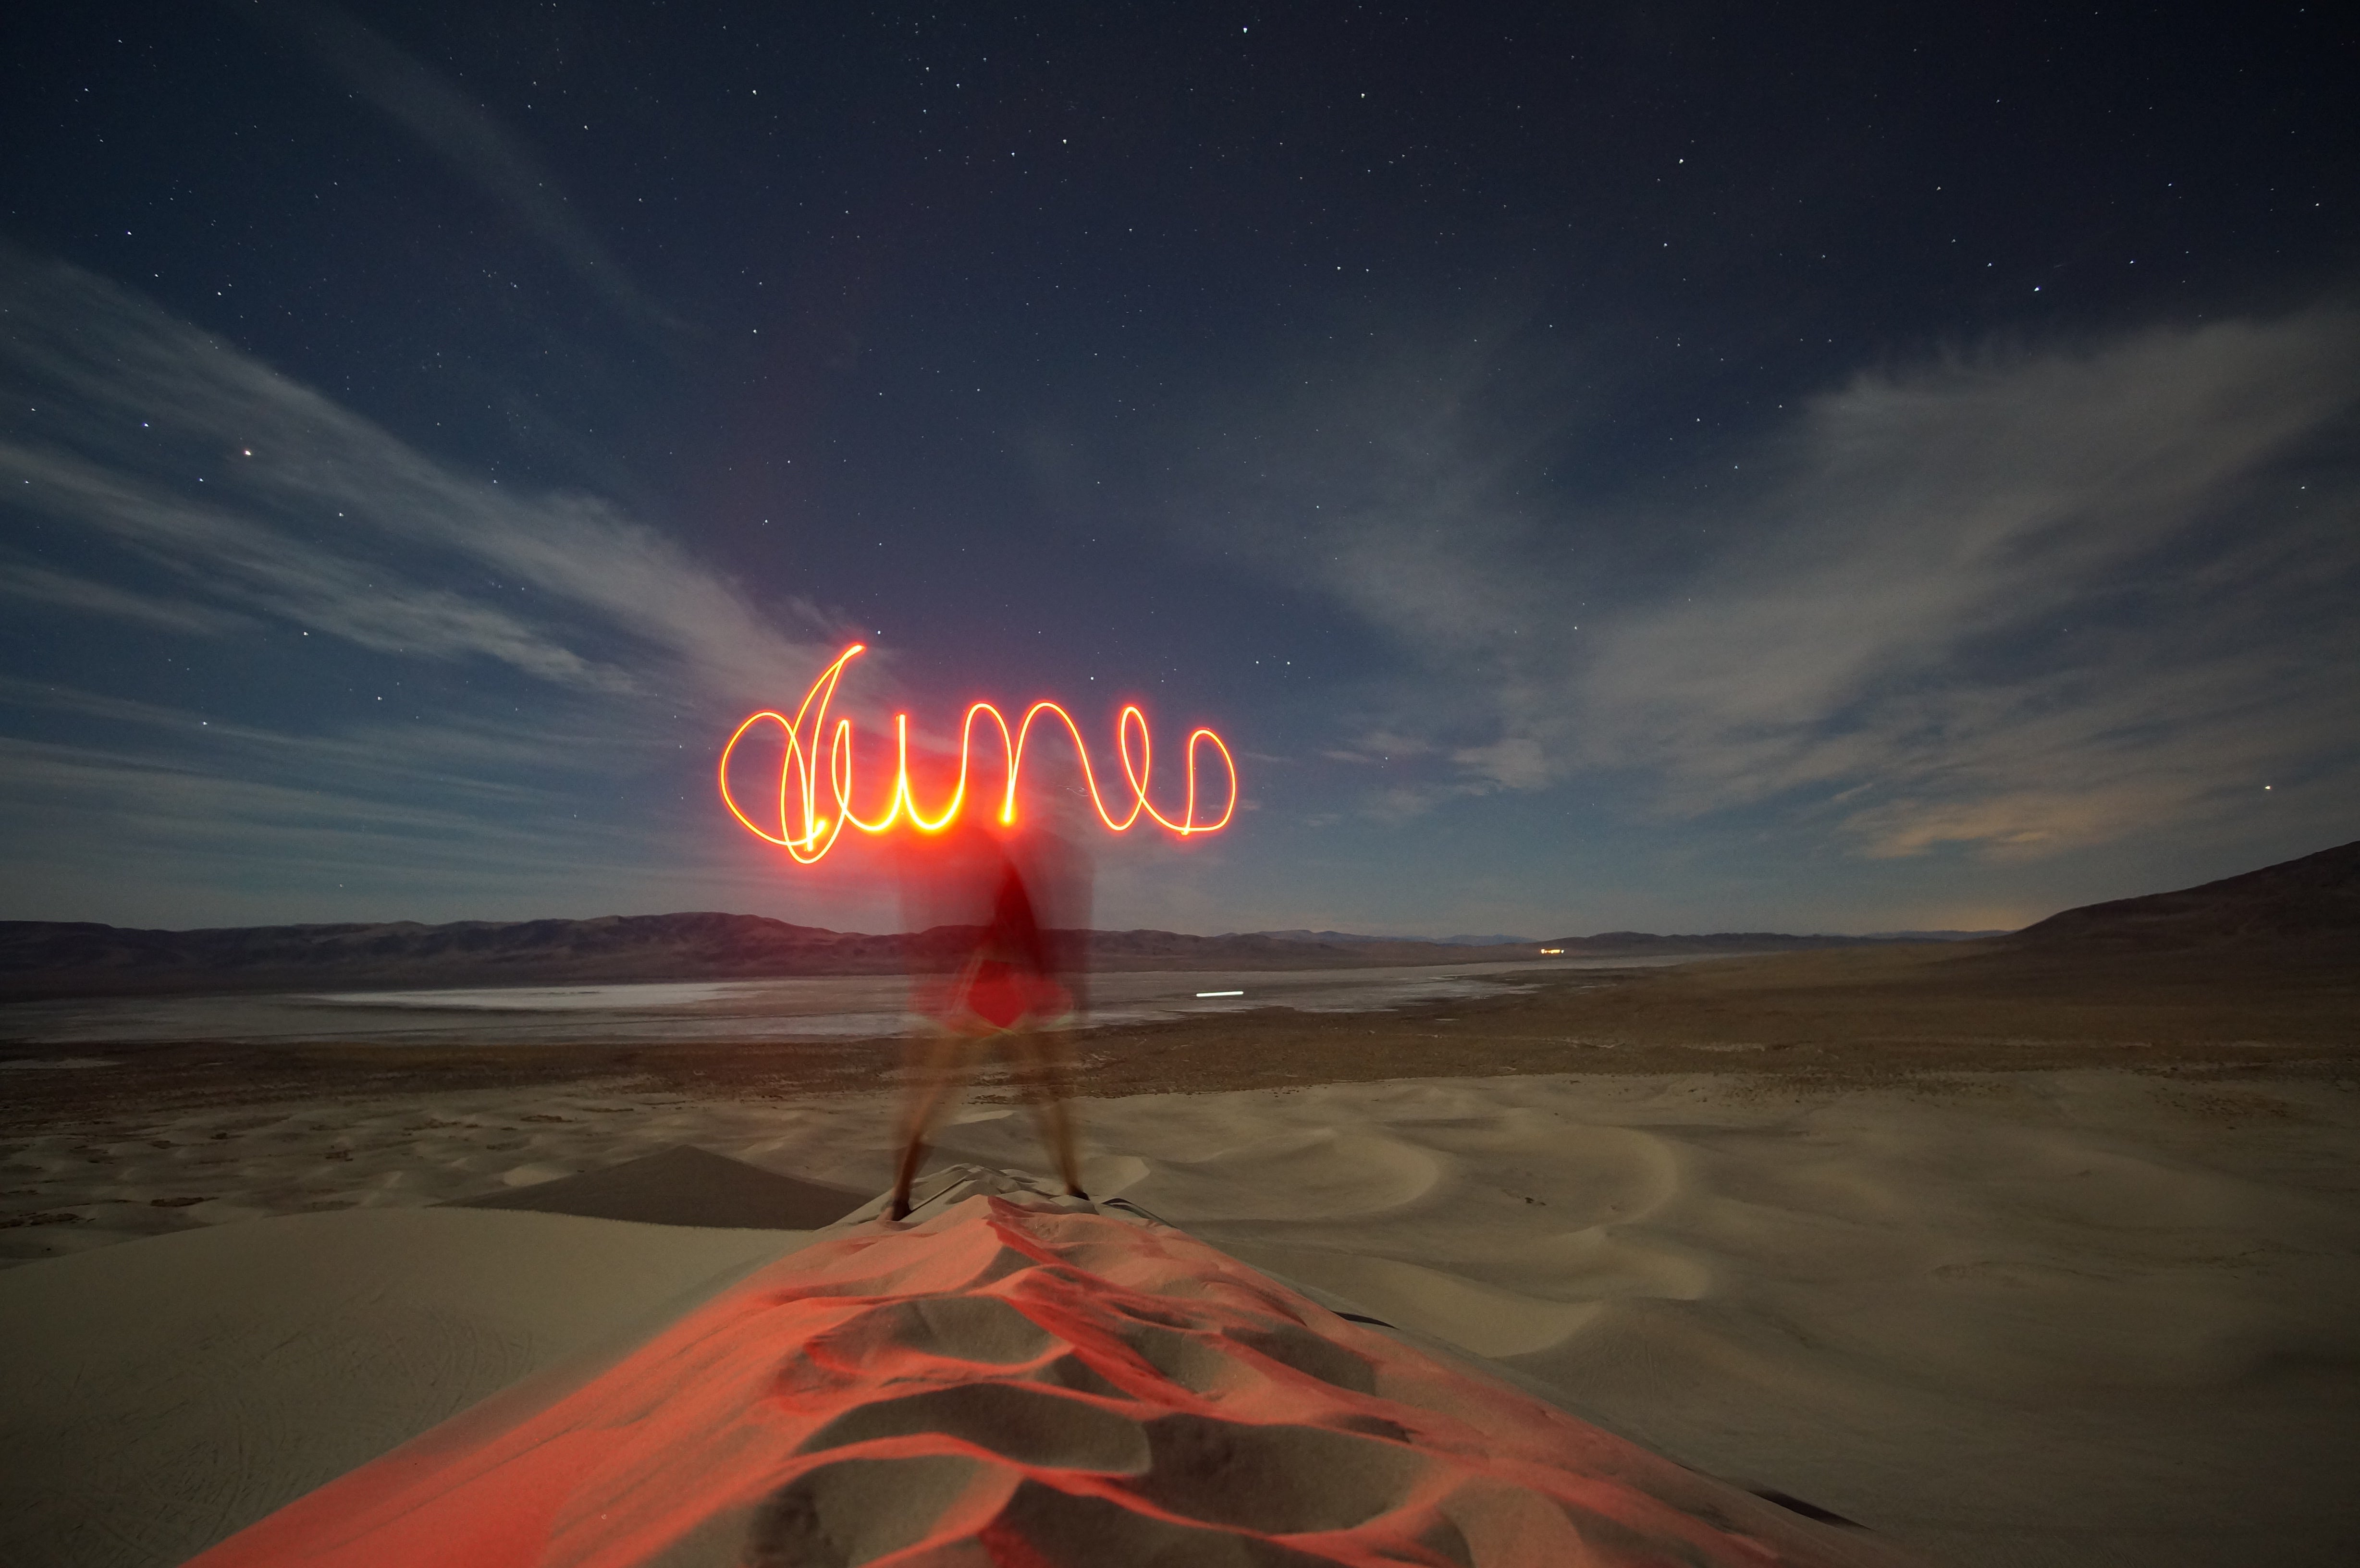 Doing some light painting!